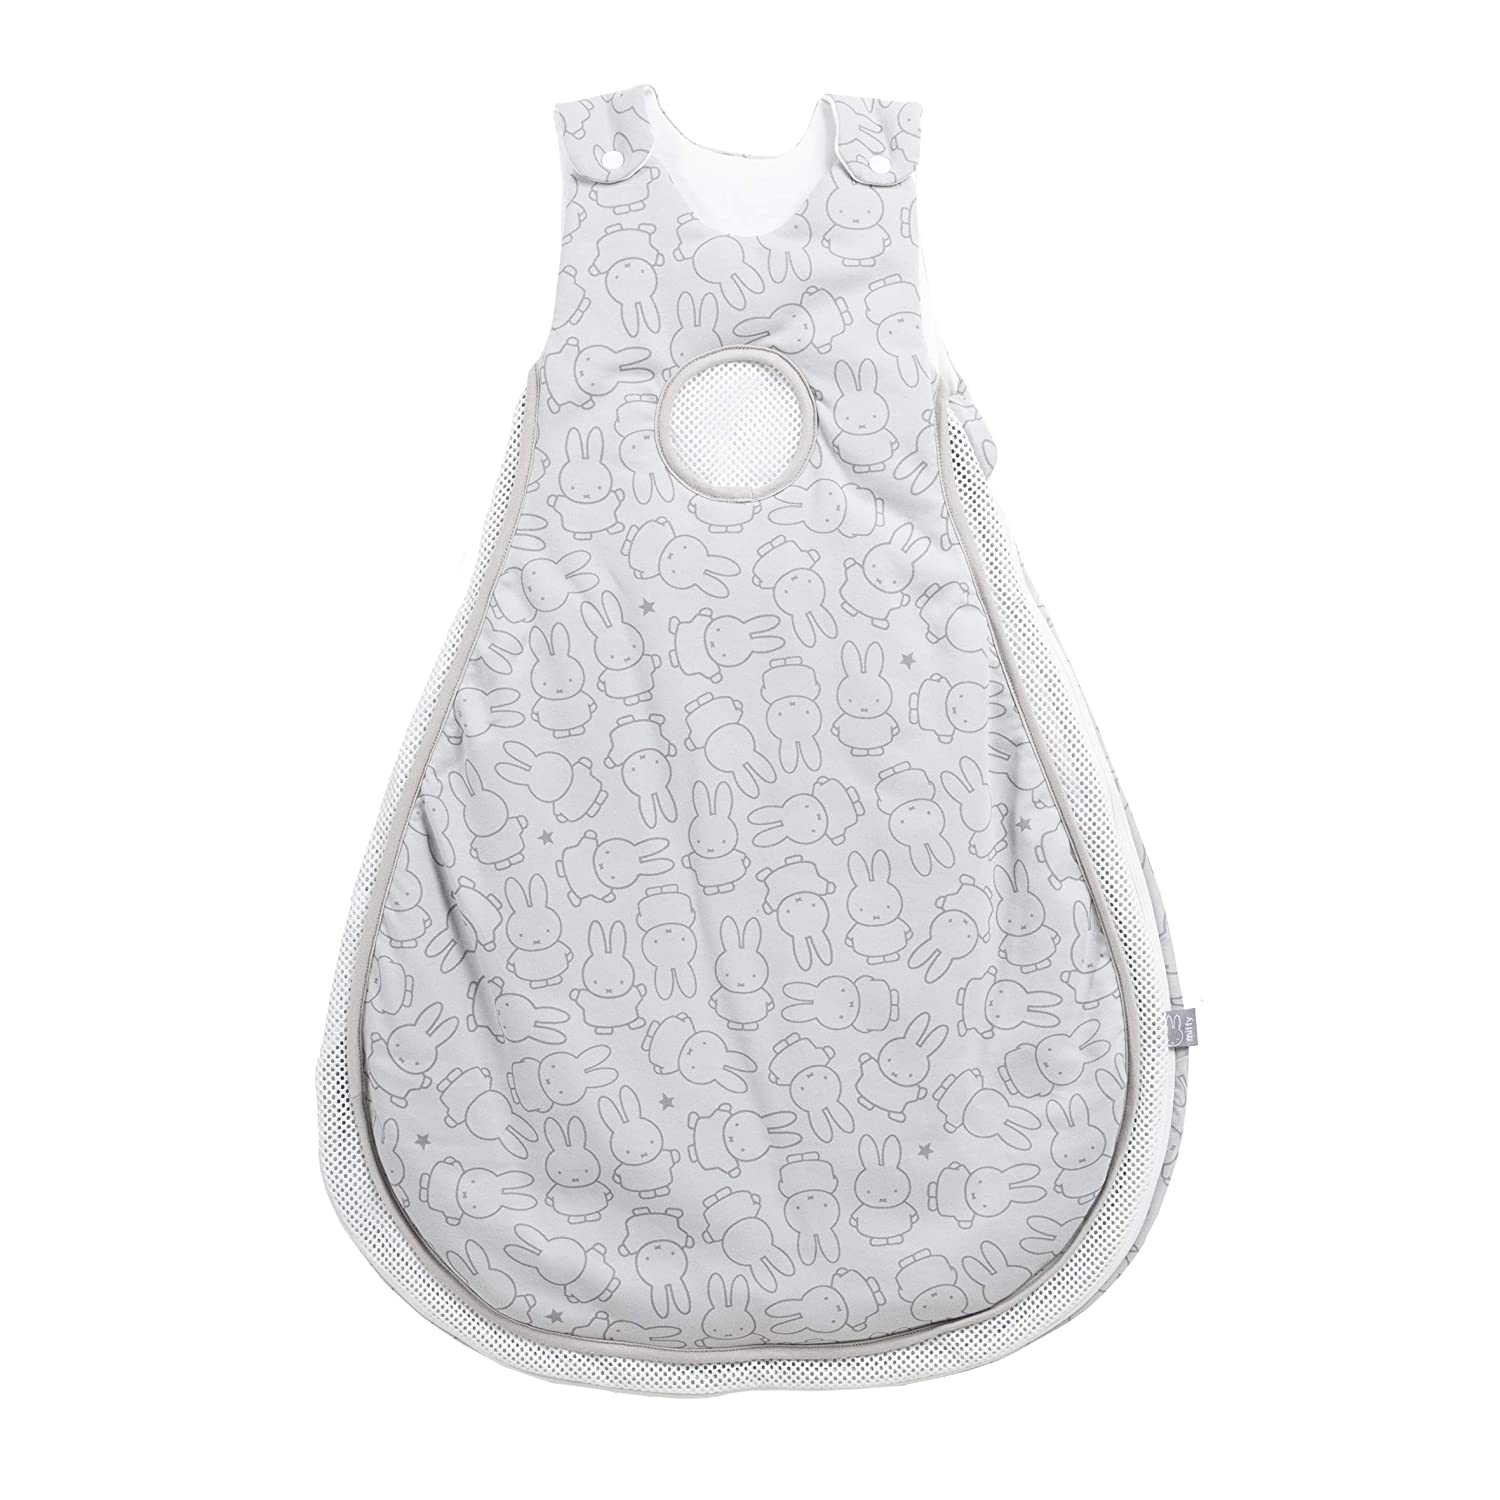 Roba Miffy safe asleep Sleeping Bag Air Size 86/92 cm, 100% Cotton, Single Jersey, Printed, Soft Filling 100% Polyester, Mesh Inserts, Air Balance System